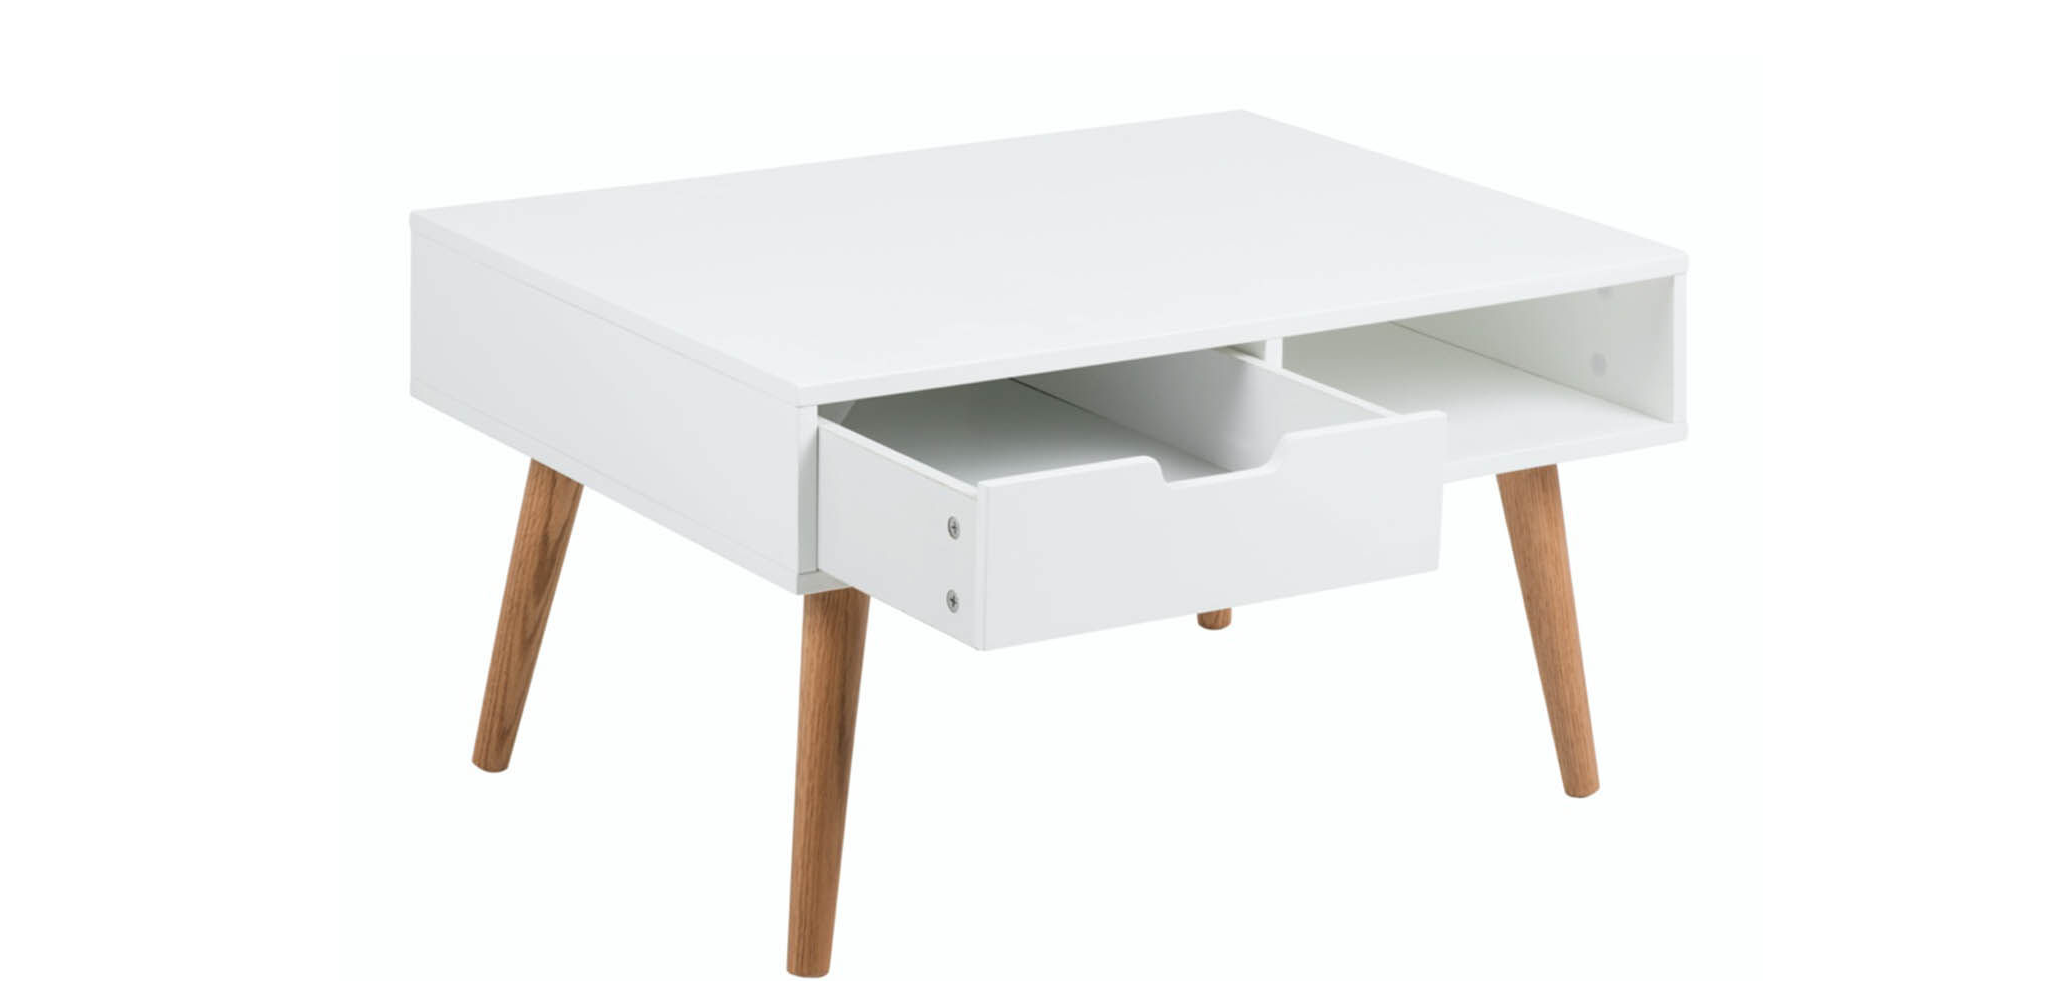 80% OFF RAMOS White Coffee Table now $49 + delivery @ Amart Furniture